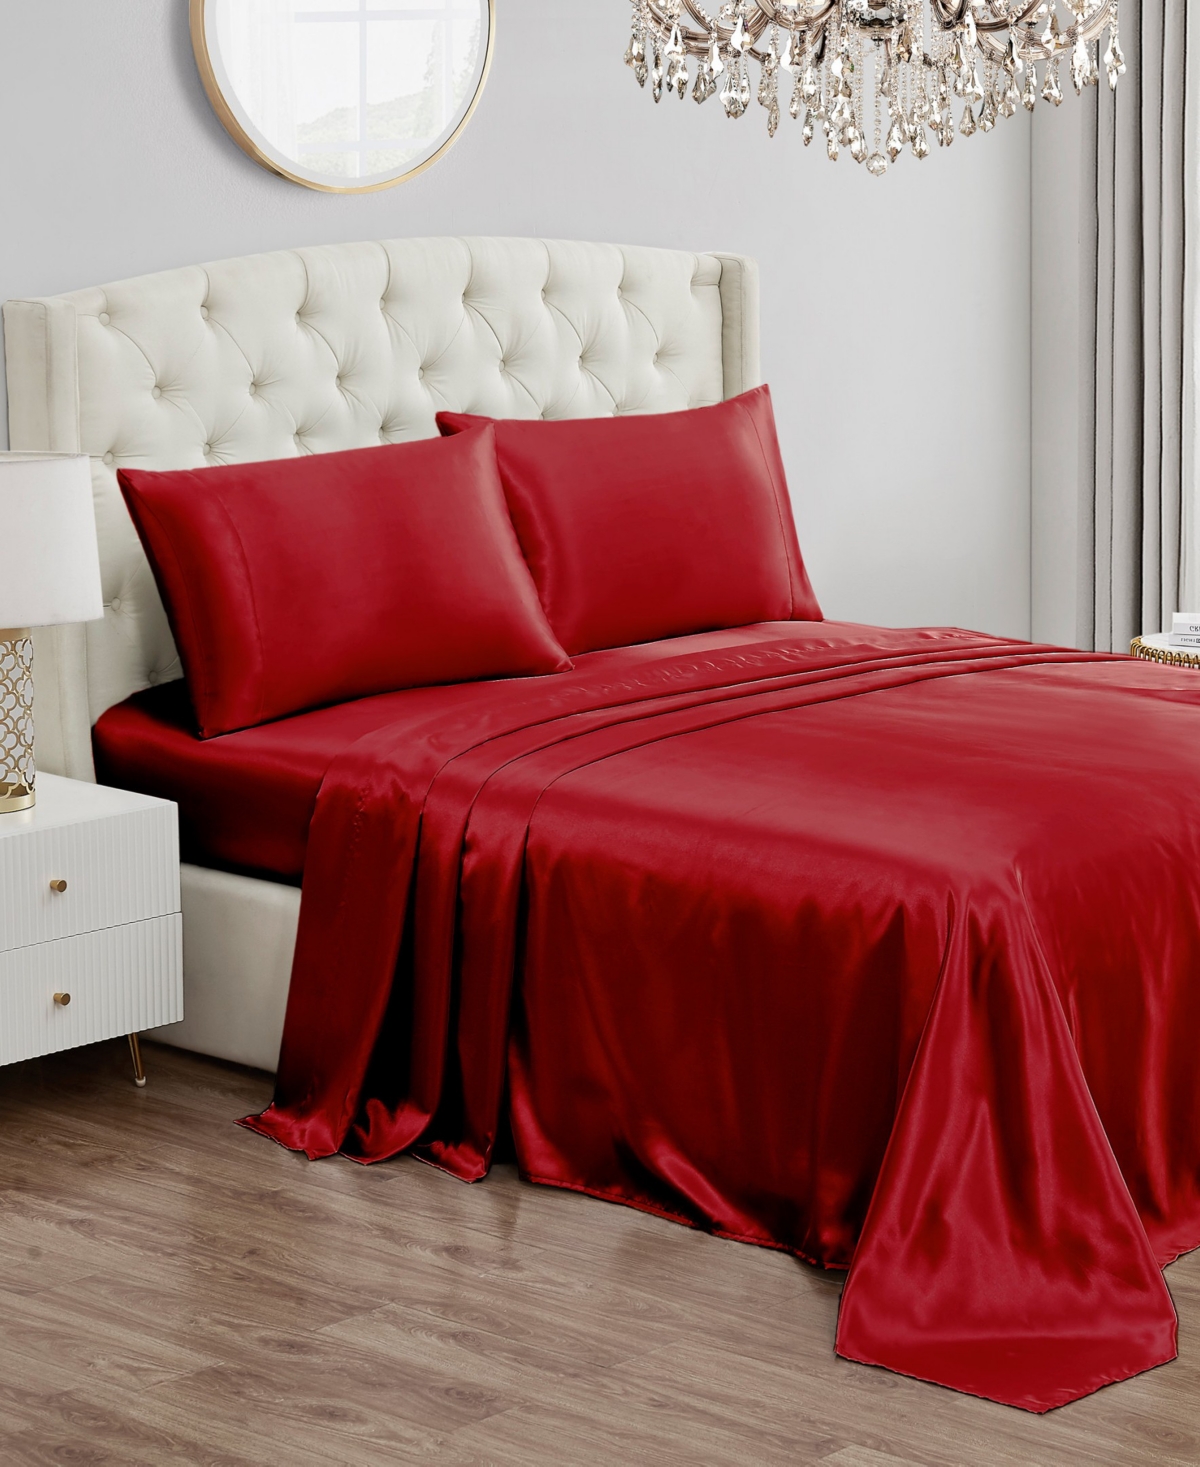 Juicy Couture Satin 4 Piece Sheet Set, Full In Red